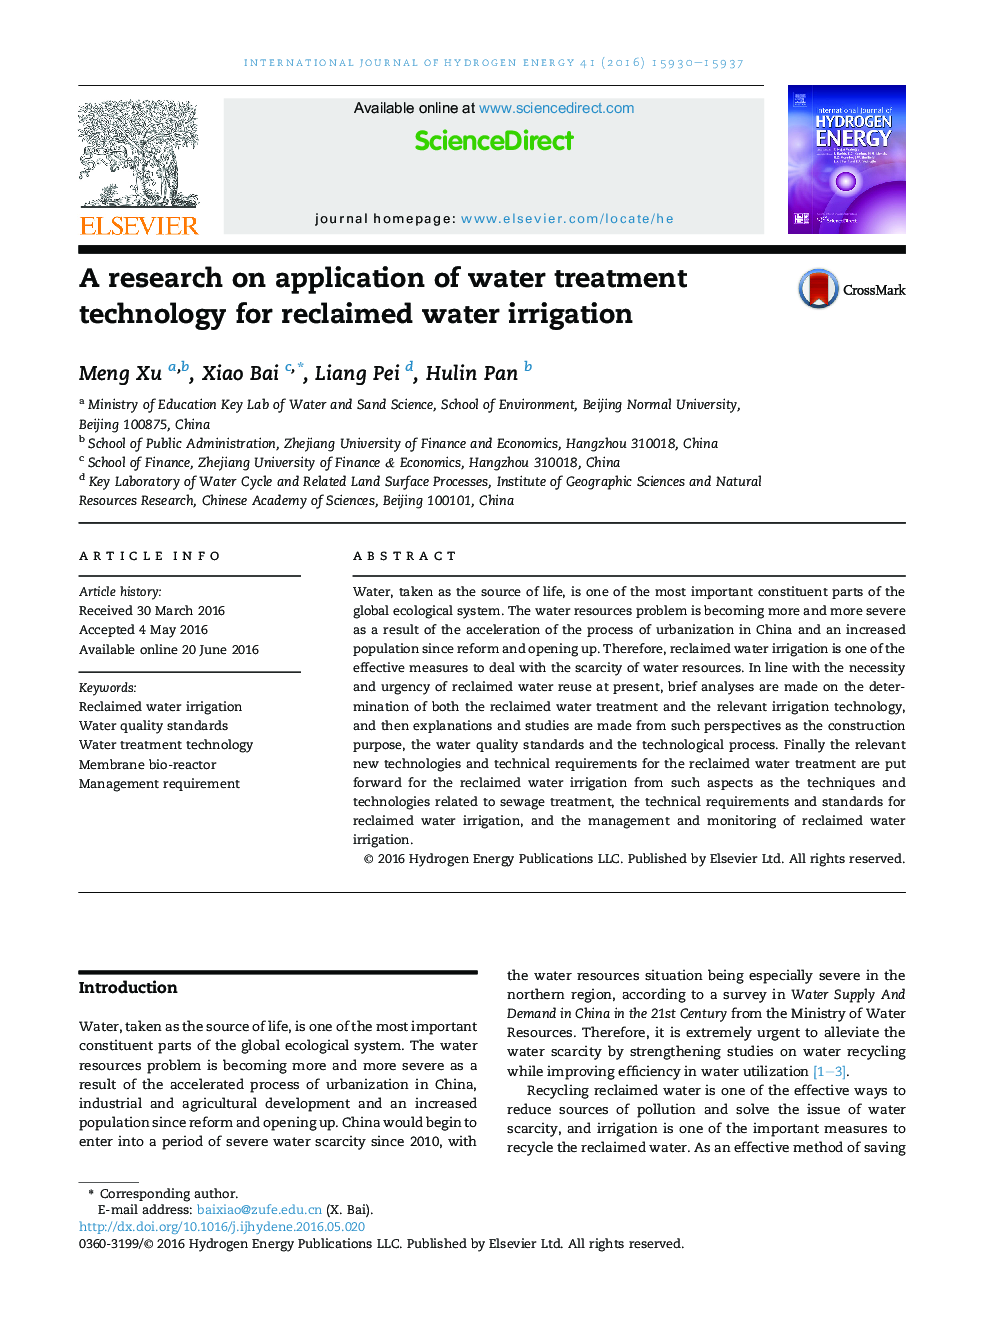 A research on application of water treatment technology for reclaimed water irrigation